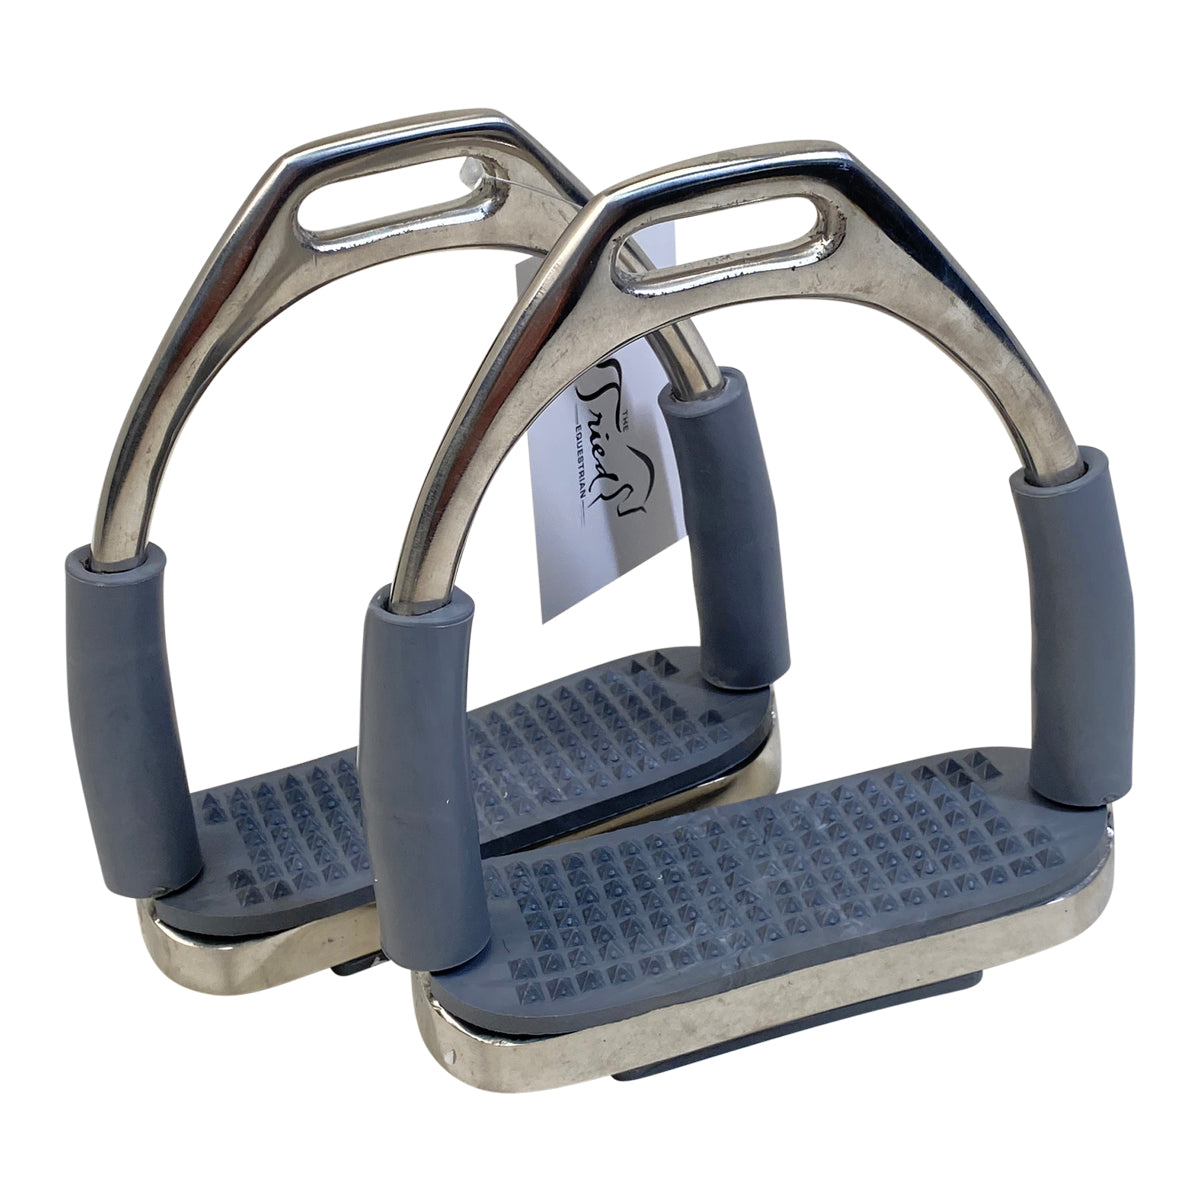 EquiRoyal Jointed Stirrups in Stainless Steel/Grey